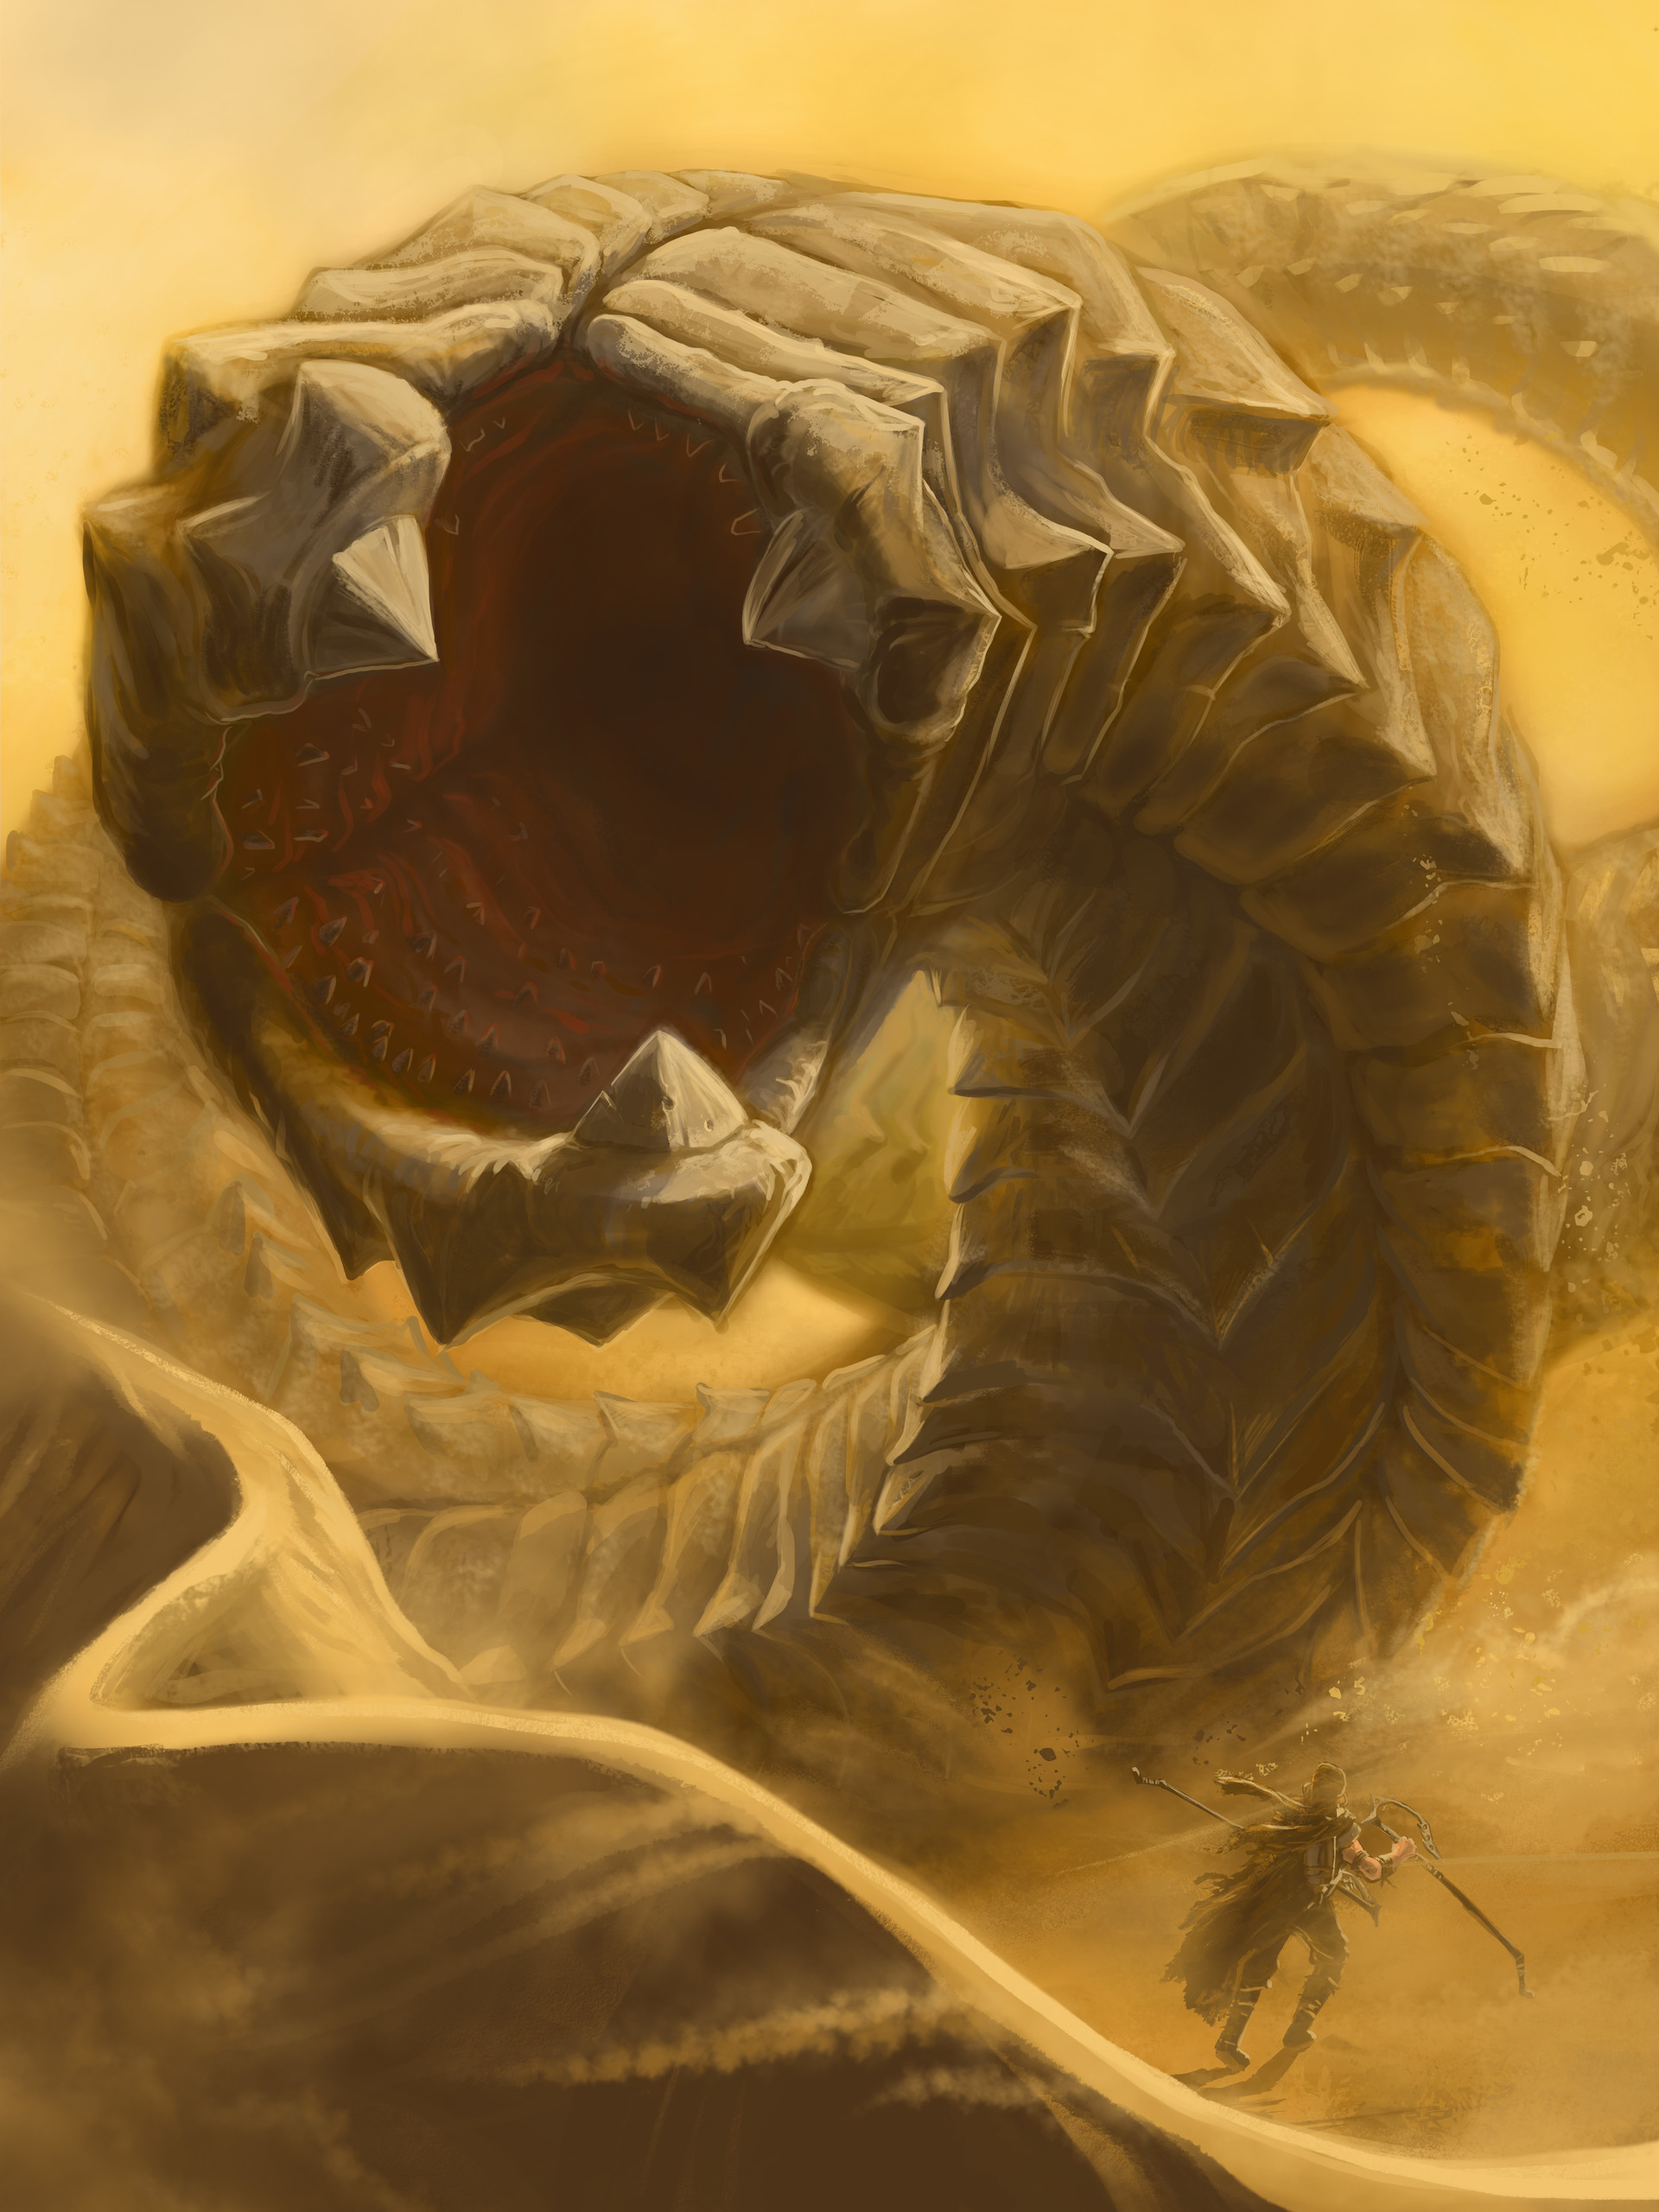 Dune inspired Sandworm and a Fremen with maker's hooks.